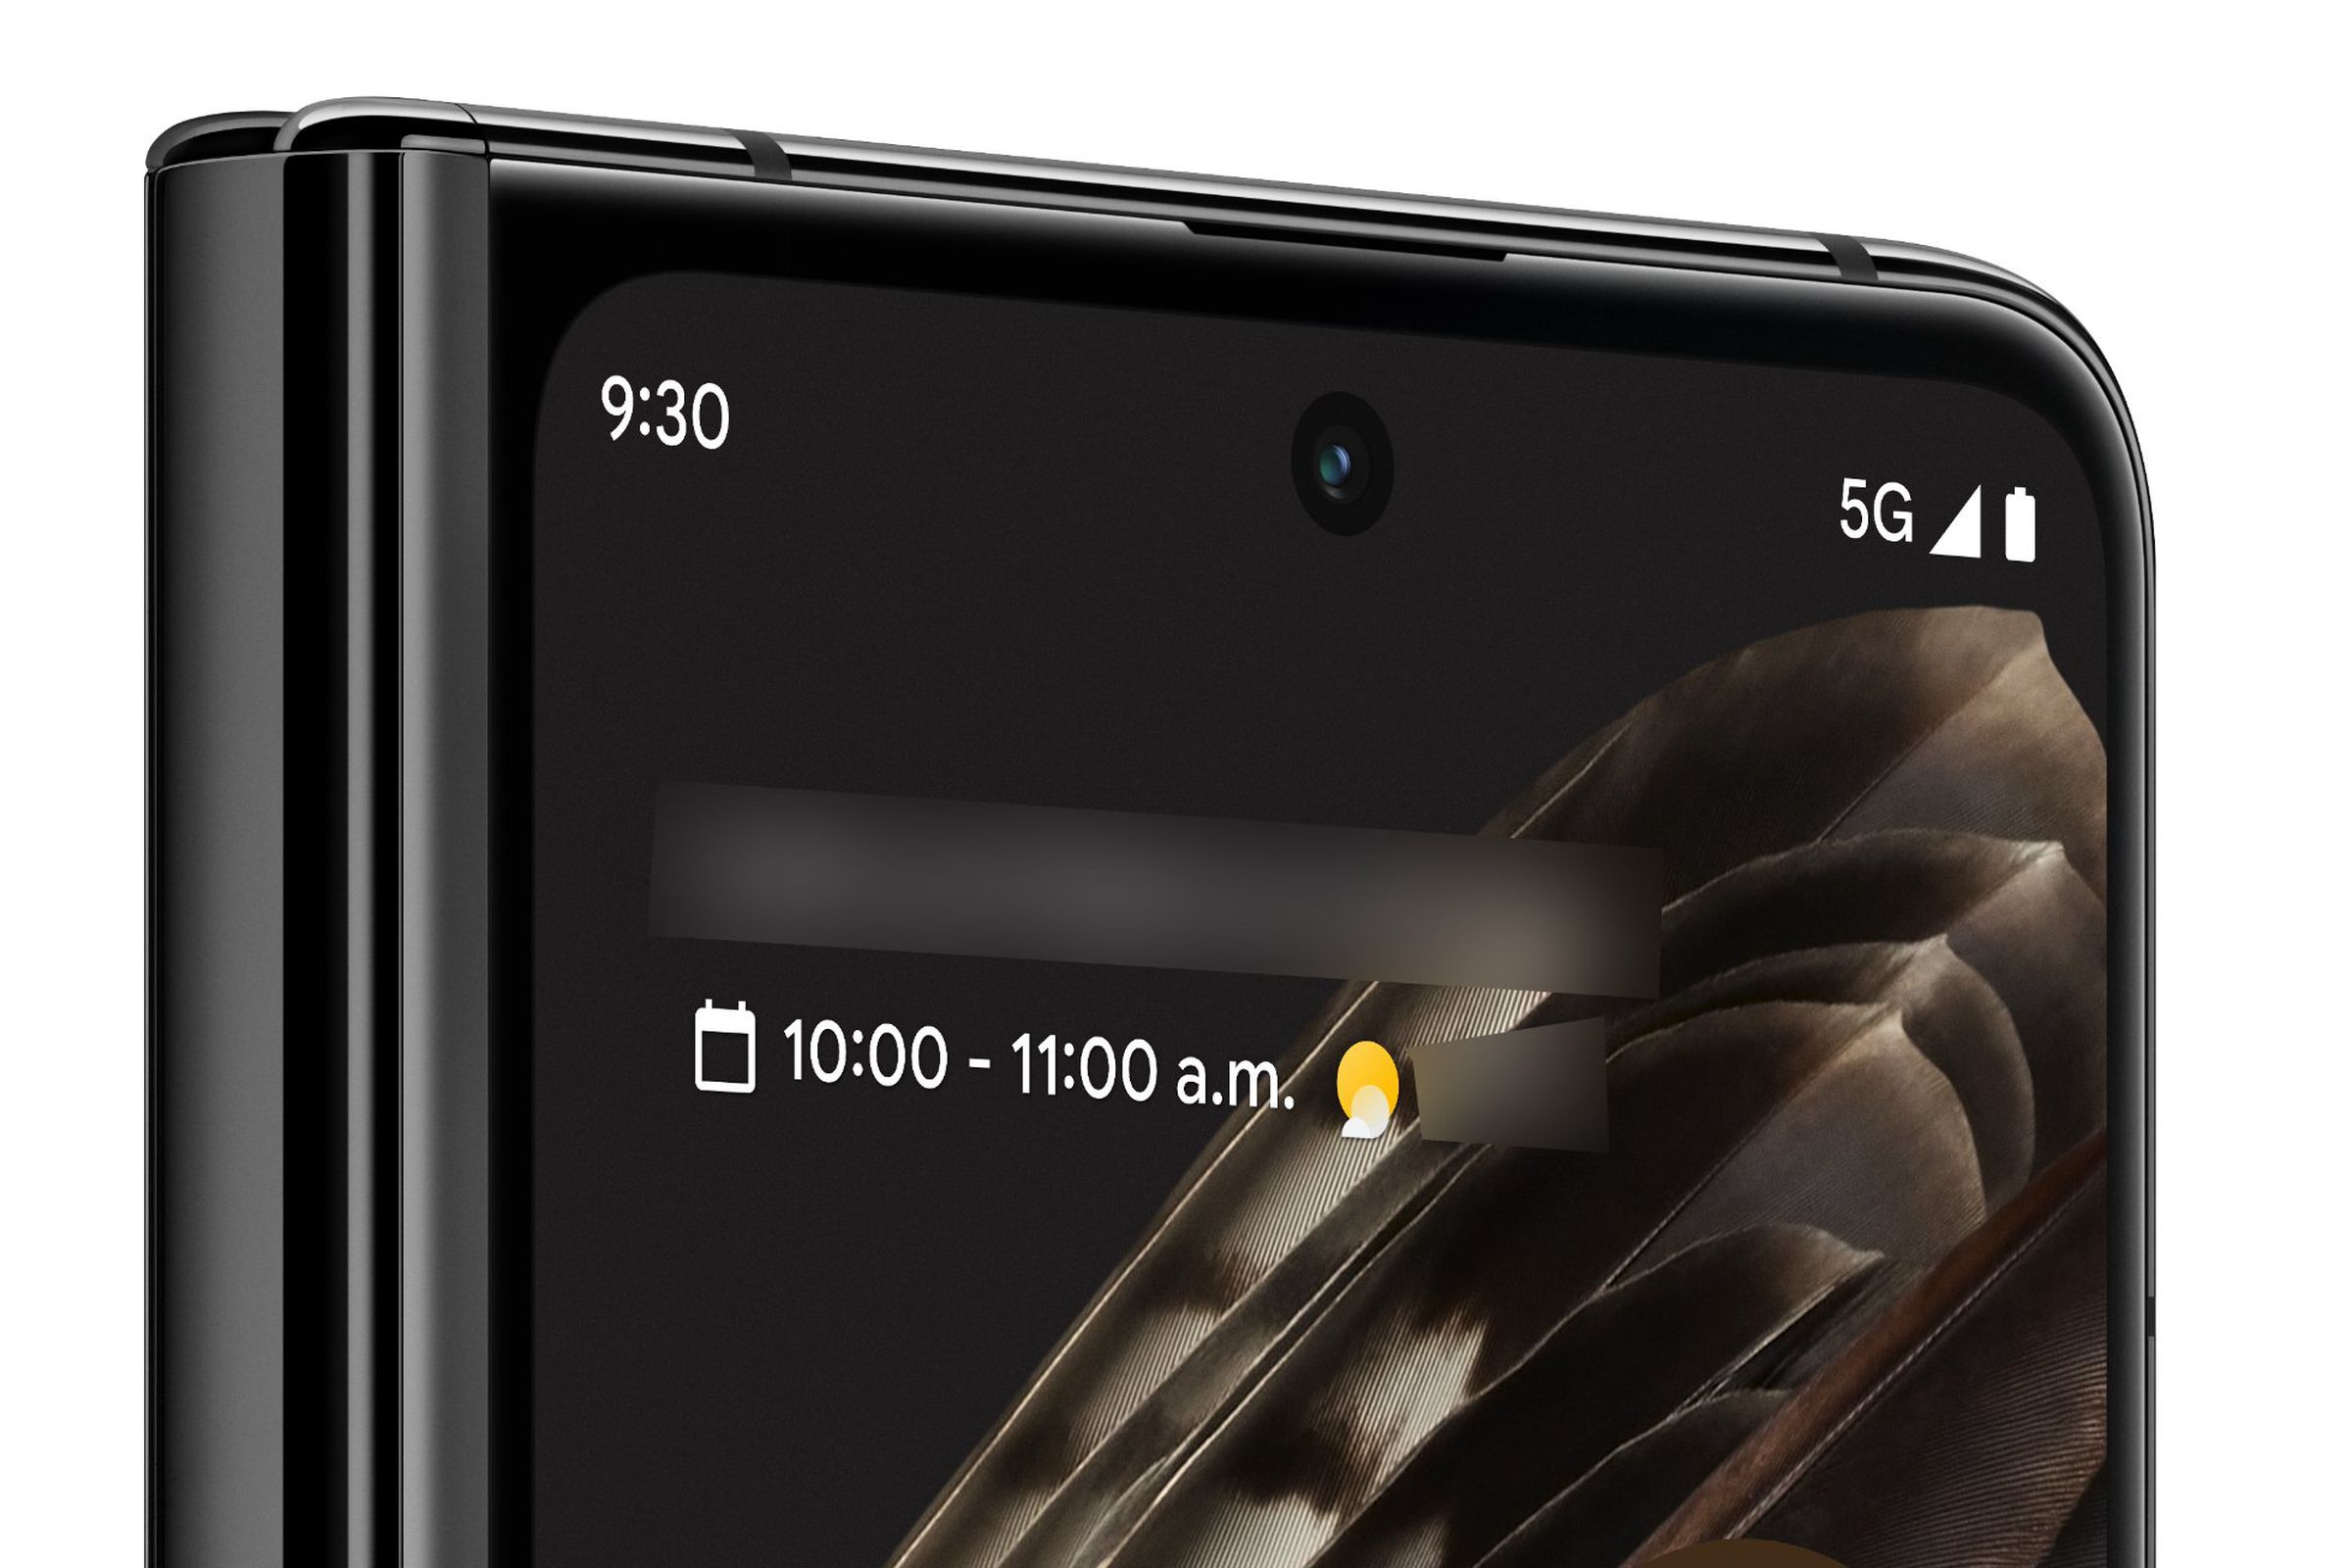 A big screen on the outside, a bigger screen within. A folding phone in profile.